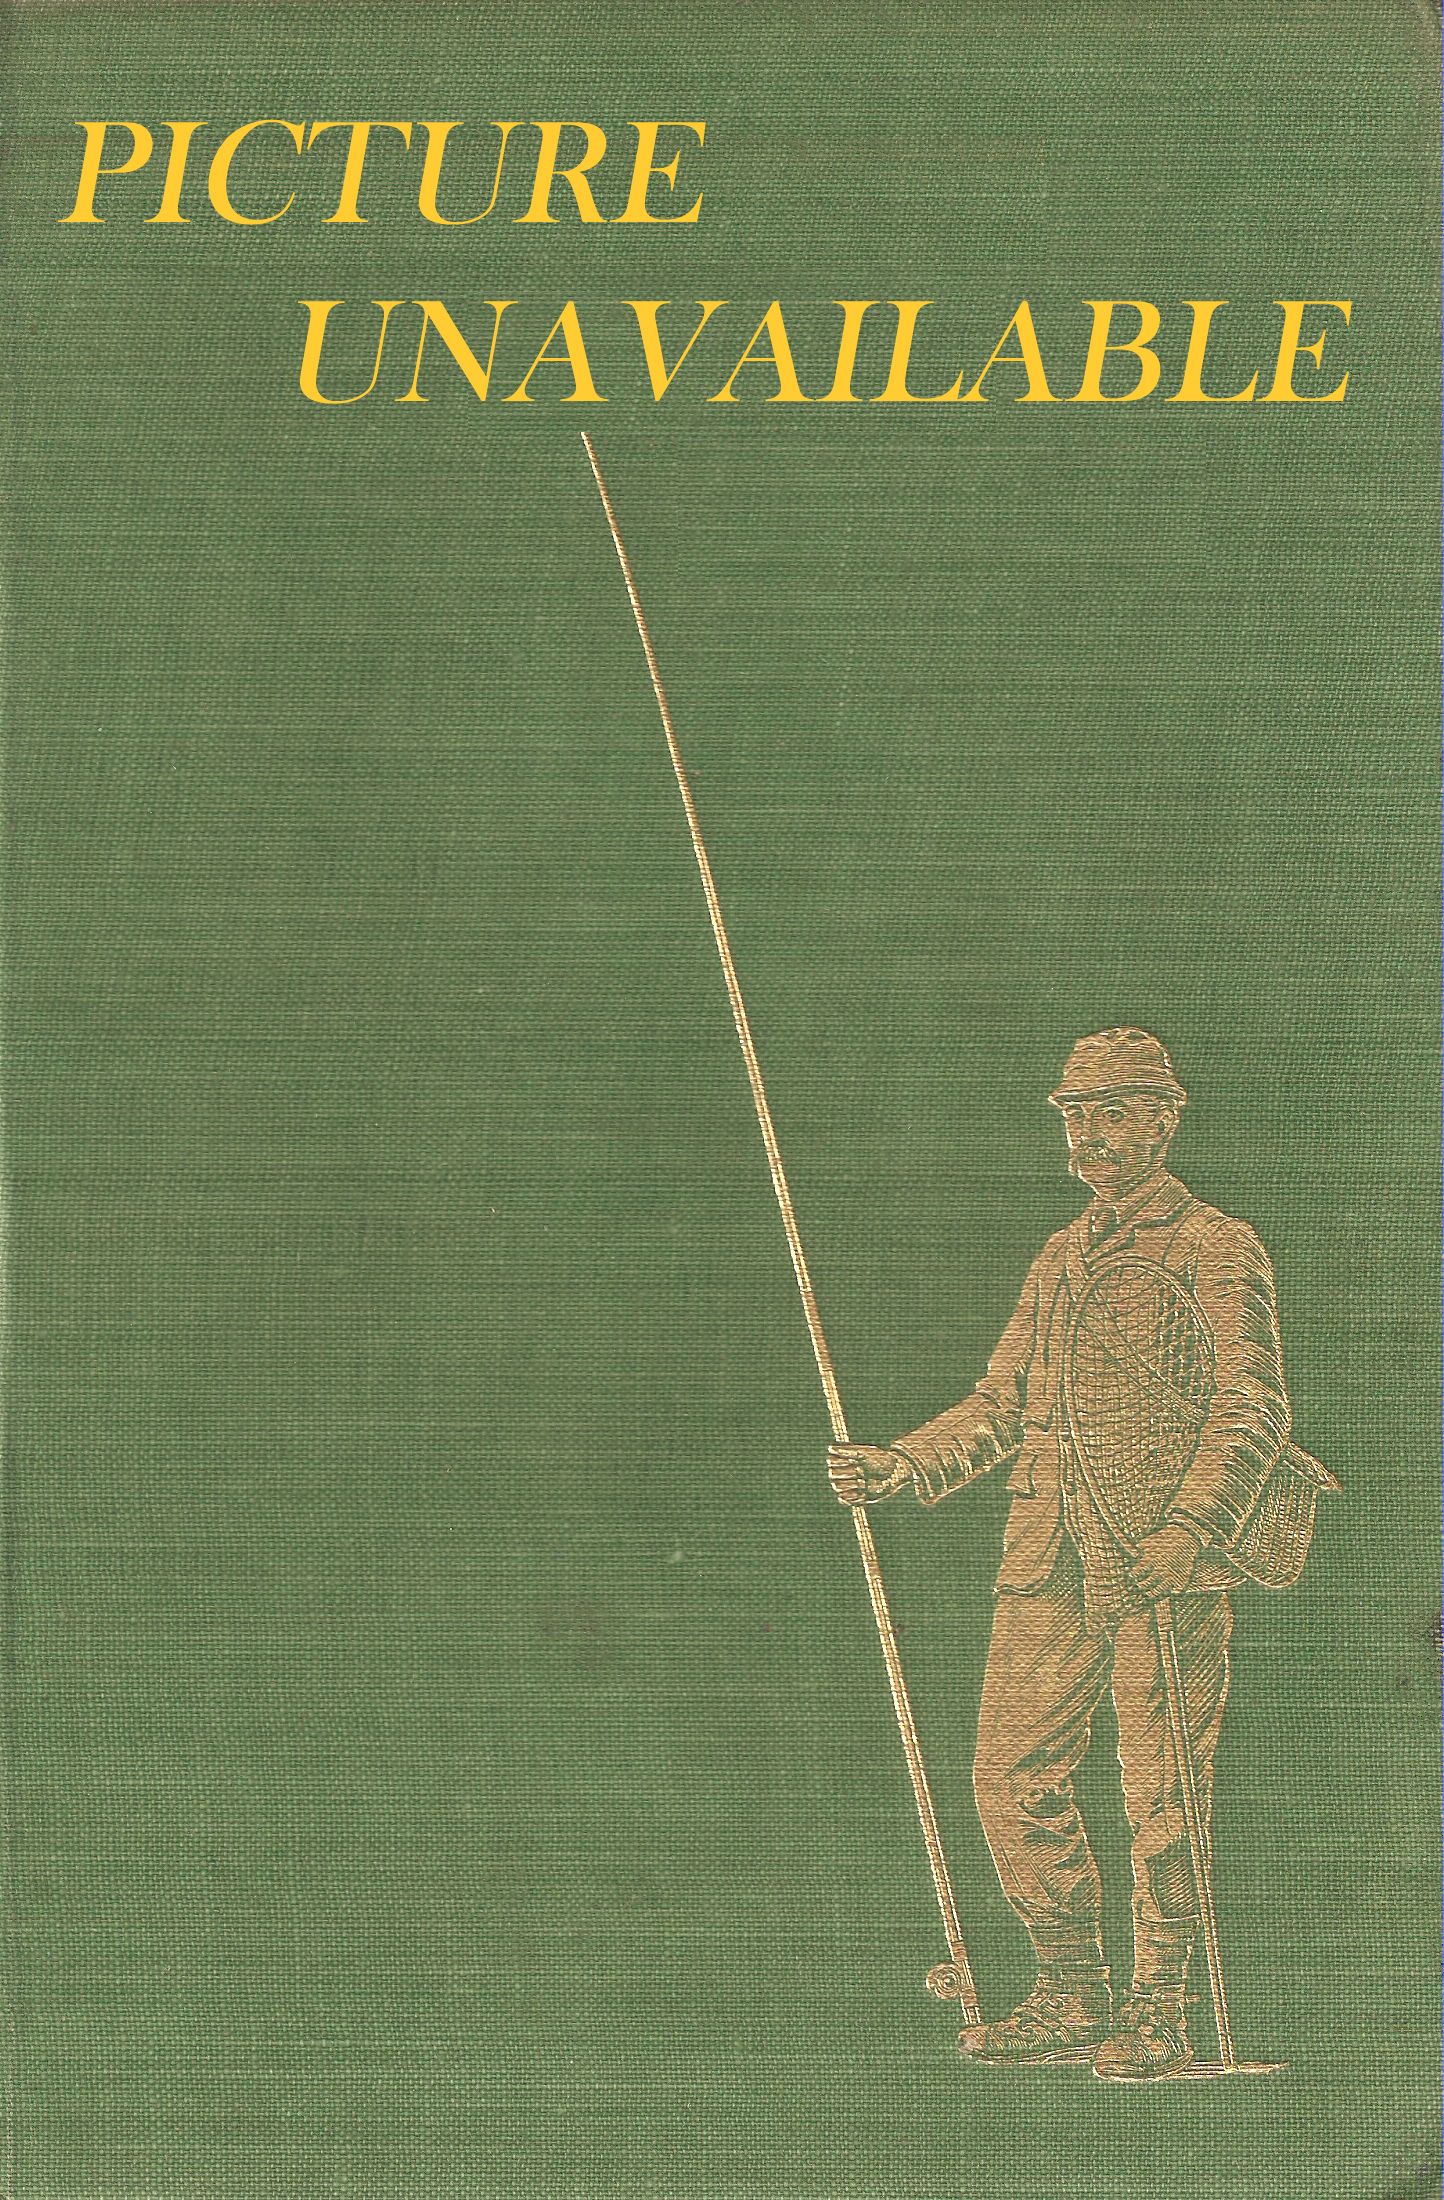 A BOOK ON ANGLING: BEING A COMPLETE TREATISE ON THE ART OF ANGLING IN  EVERY BRANCH WITH EXPLANATORY PLATES, ETC. By Francis Francis. Flyfisher's  Classic Library de luxe edition.